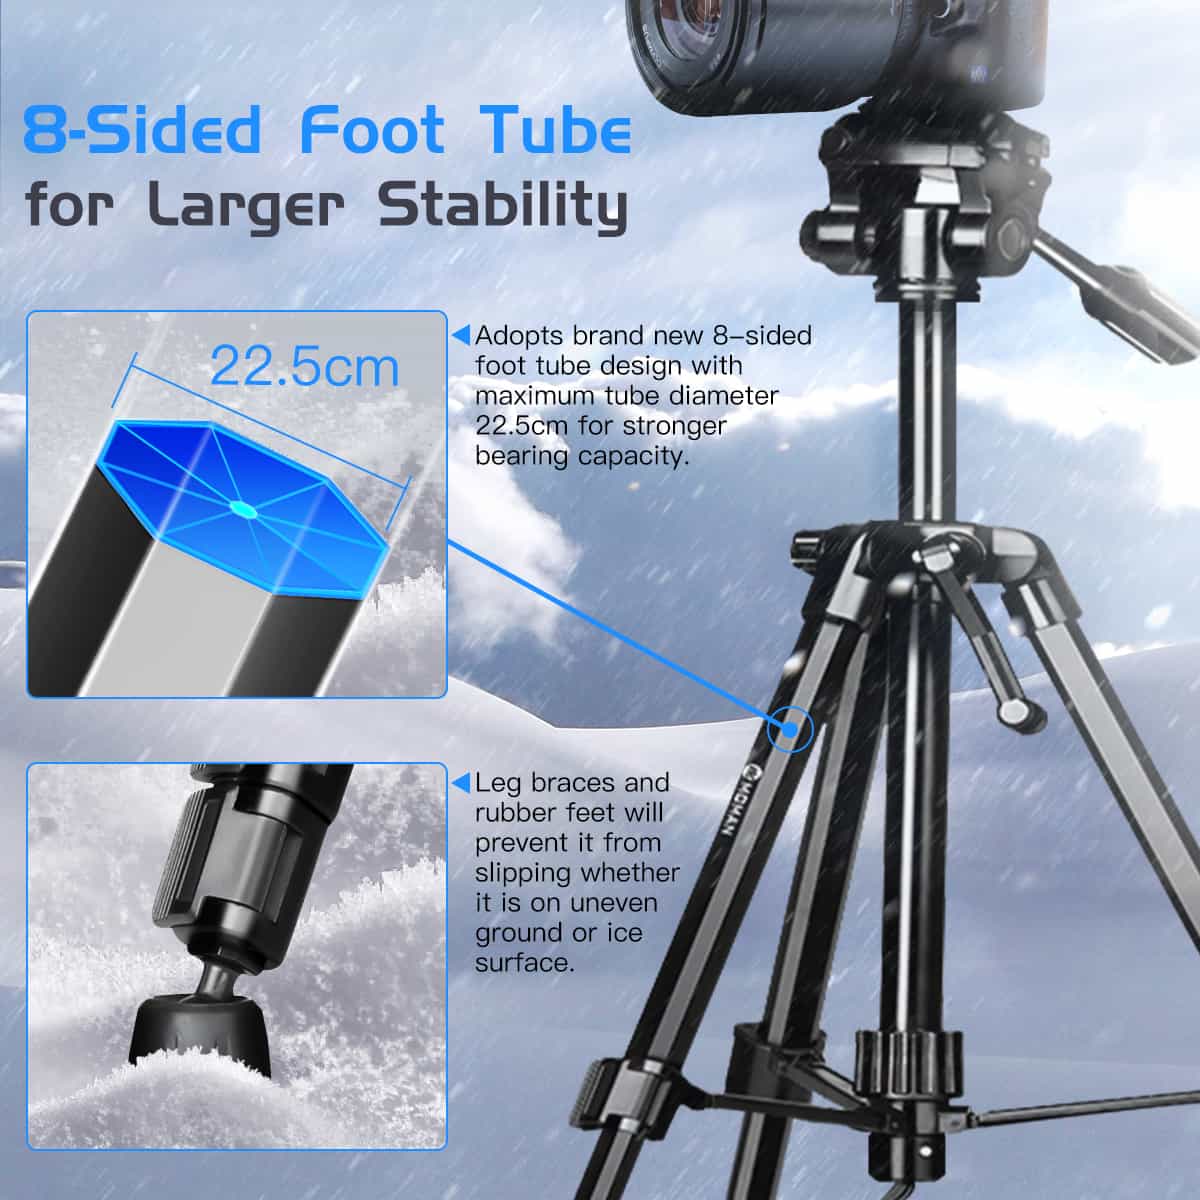 Moman Max80 travel camera tripod adopts 8-sided foot tube for larger stability and stronger bearing capacity.